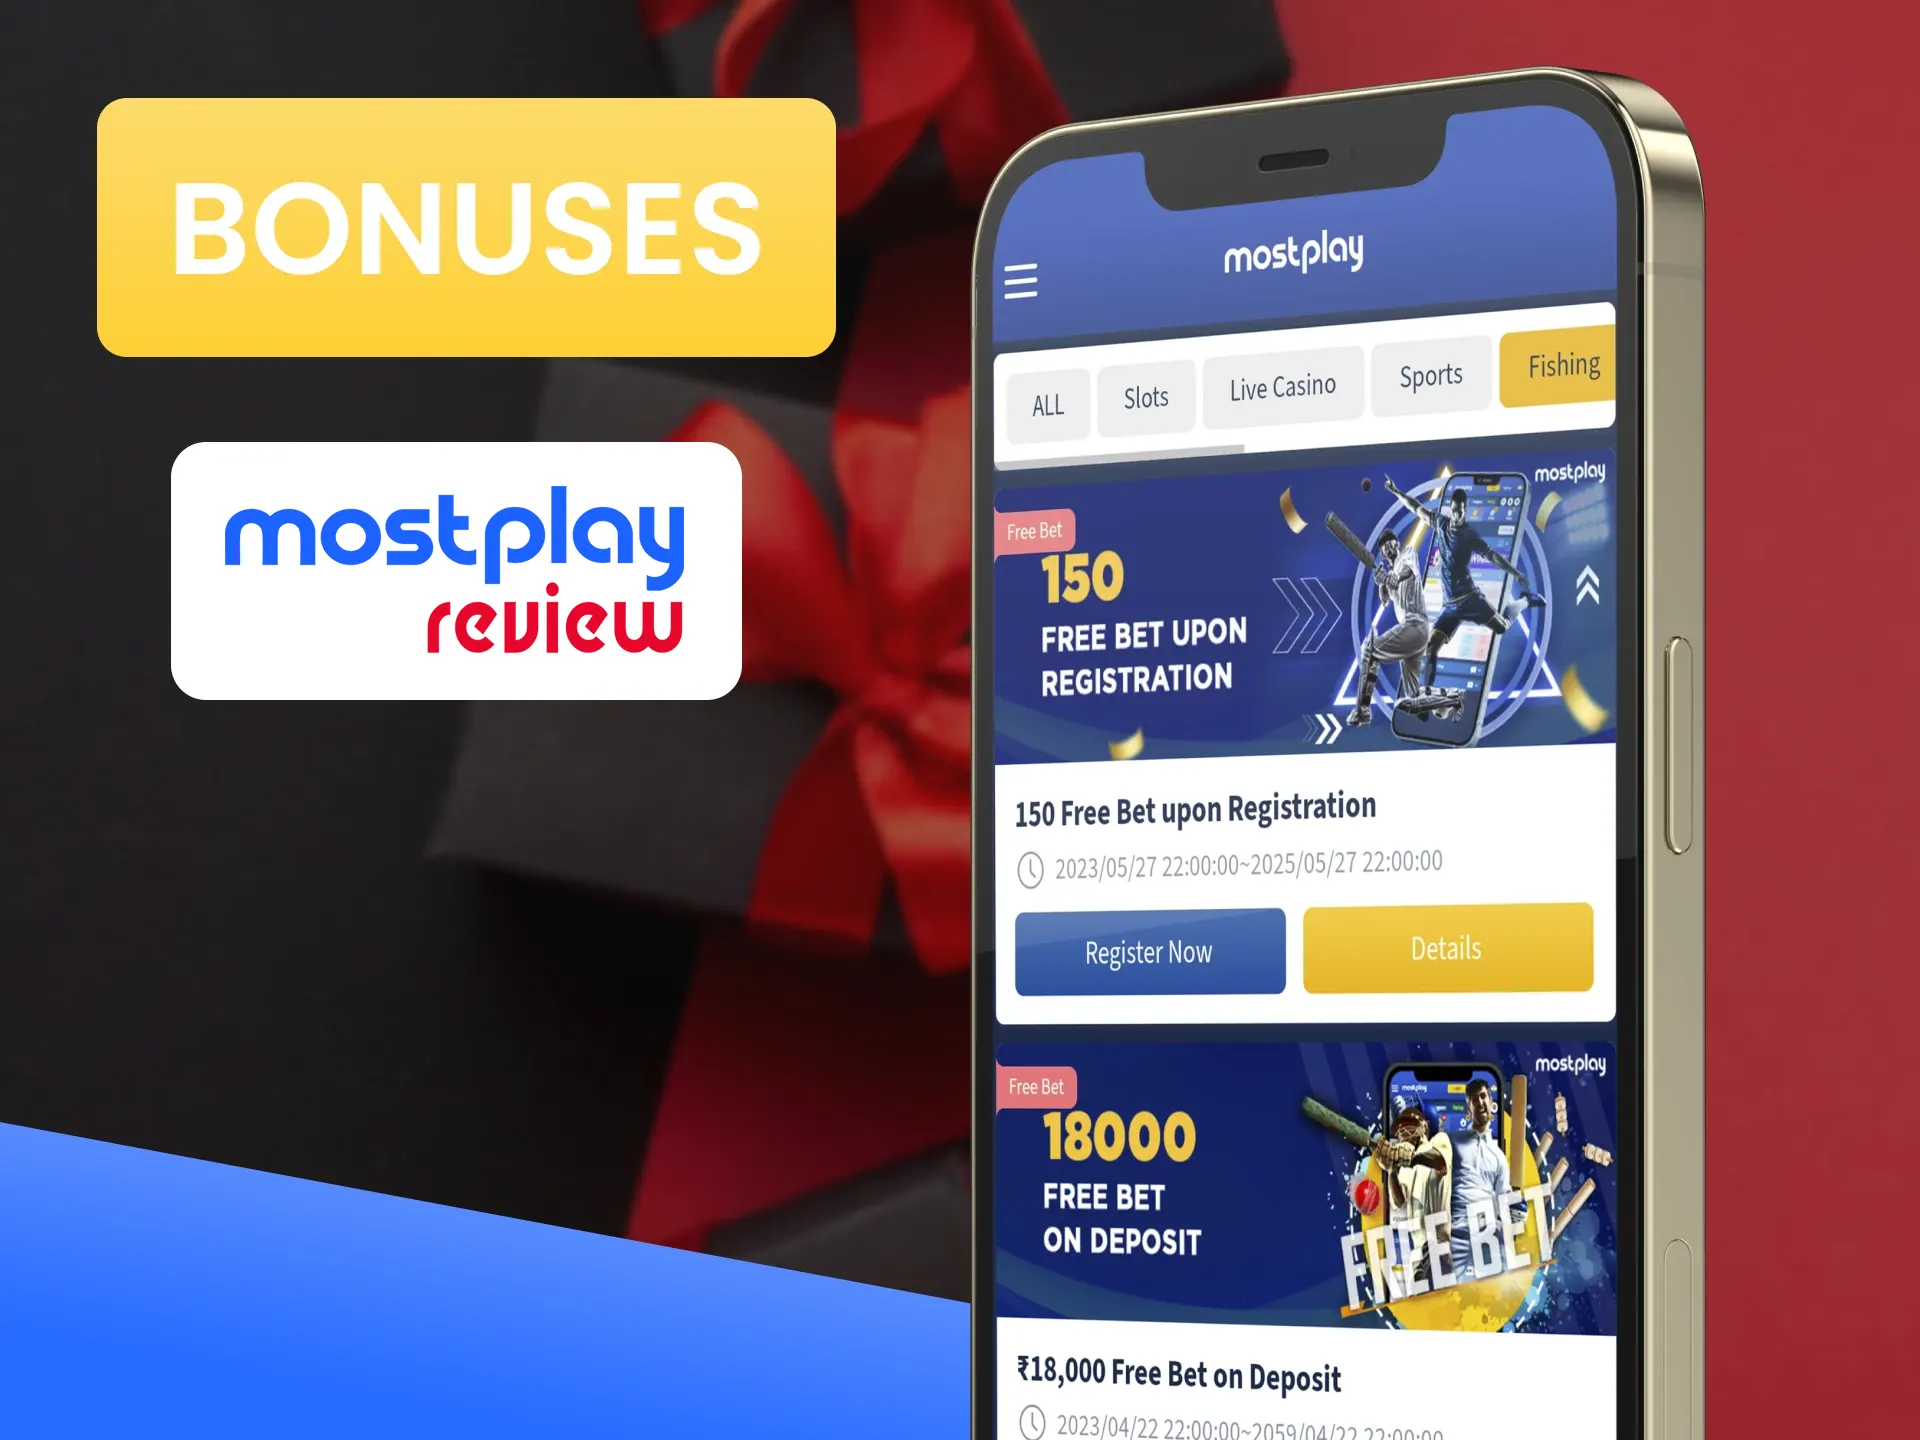 Get a bonus from Mostplay for playing fishing games.